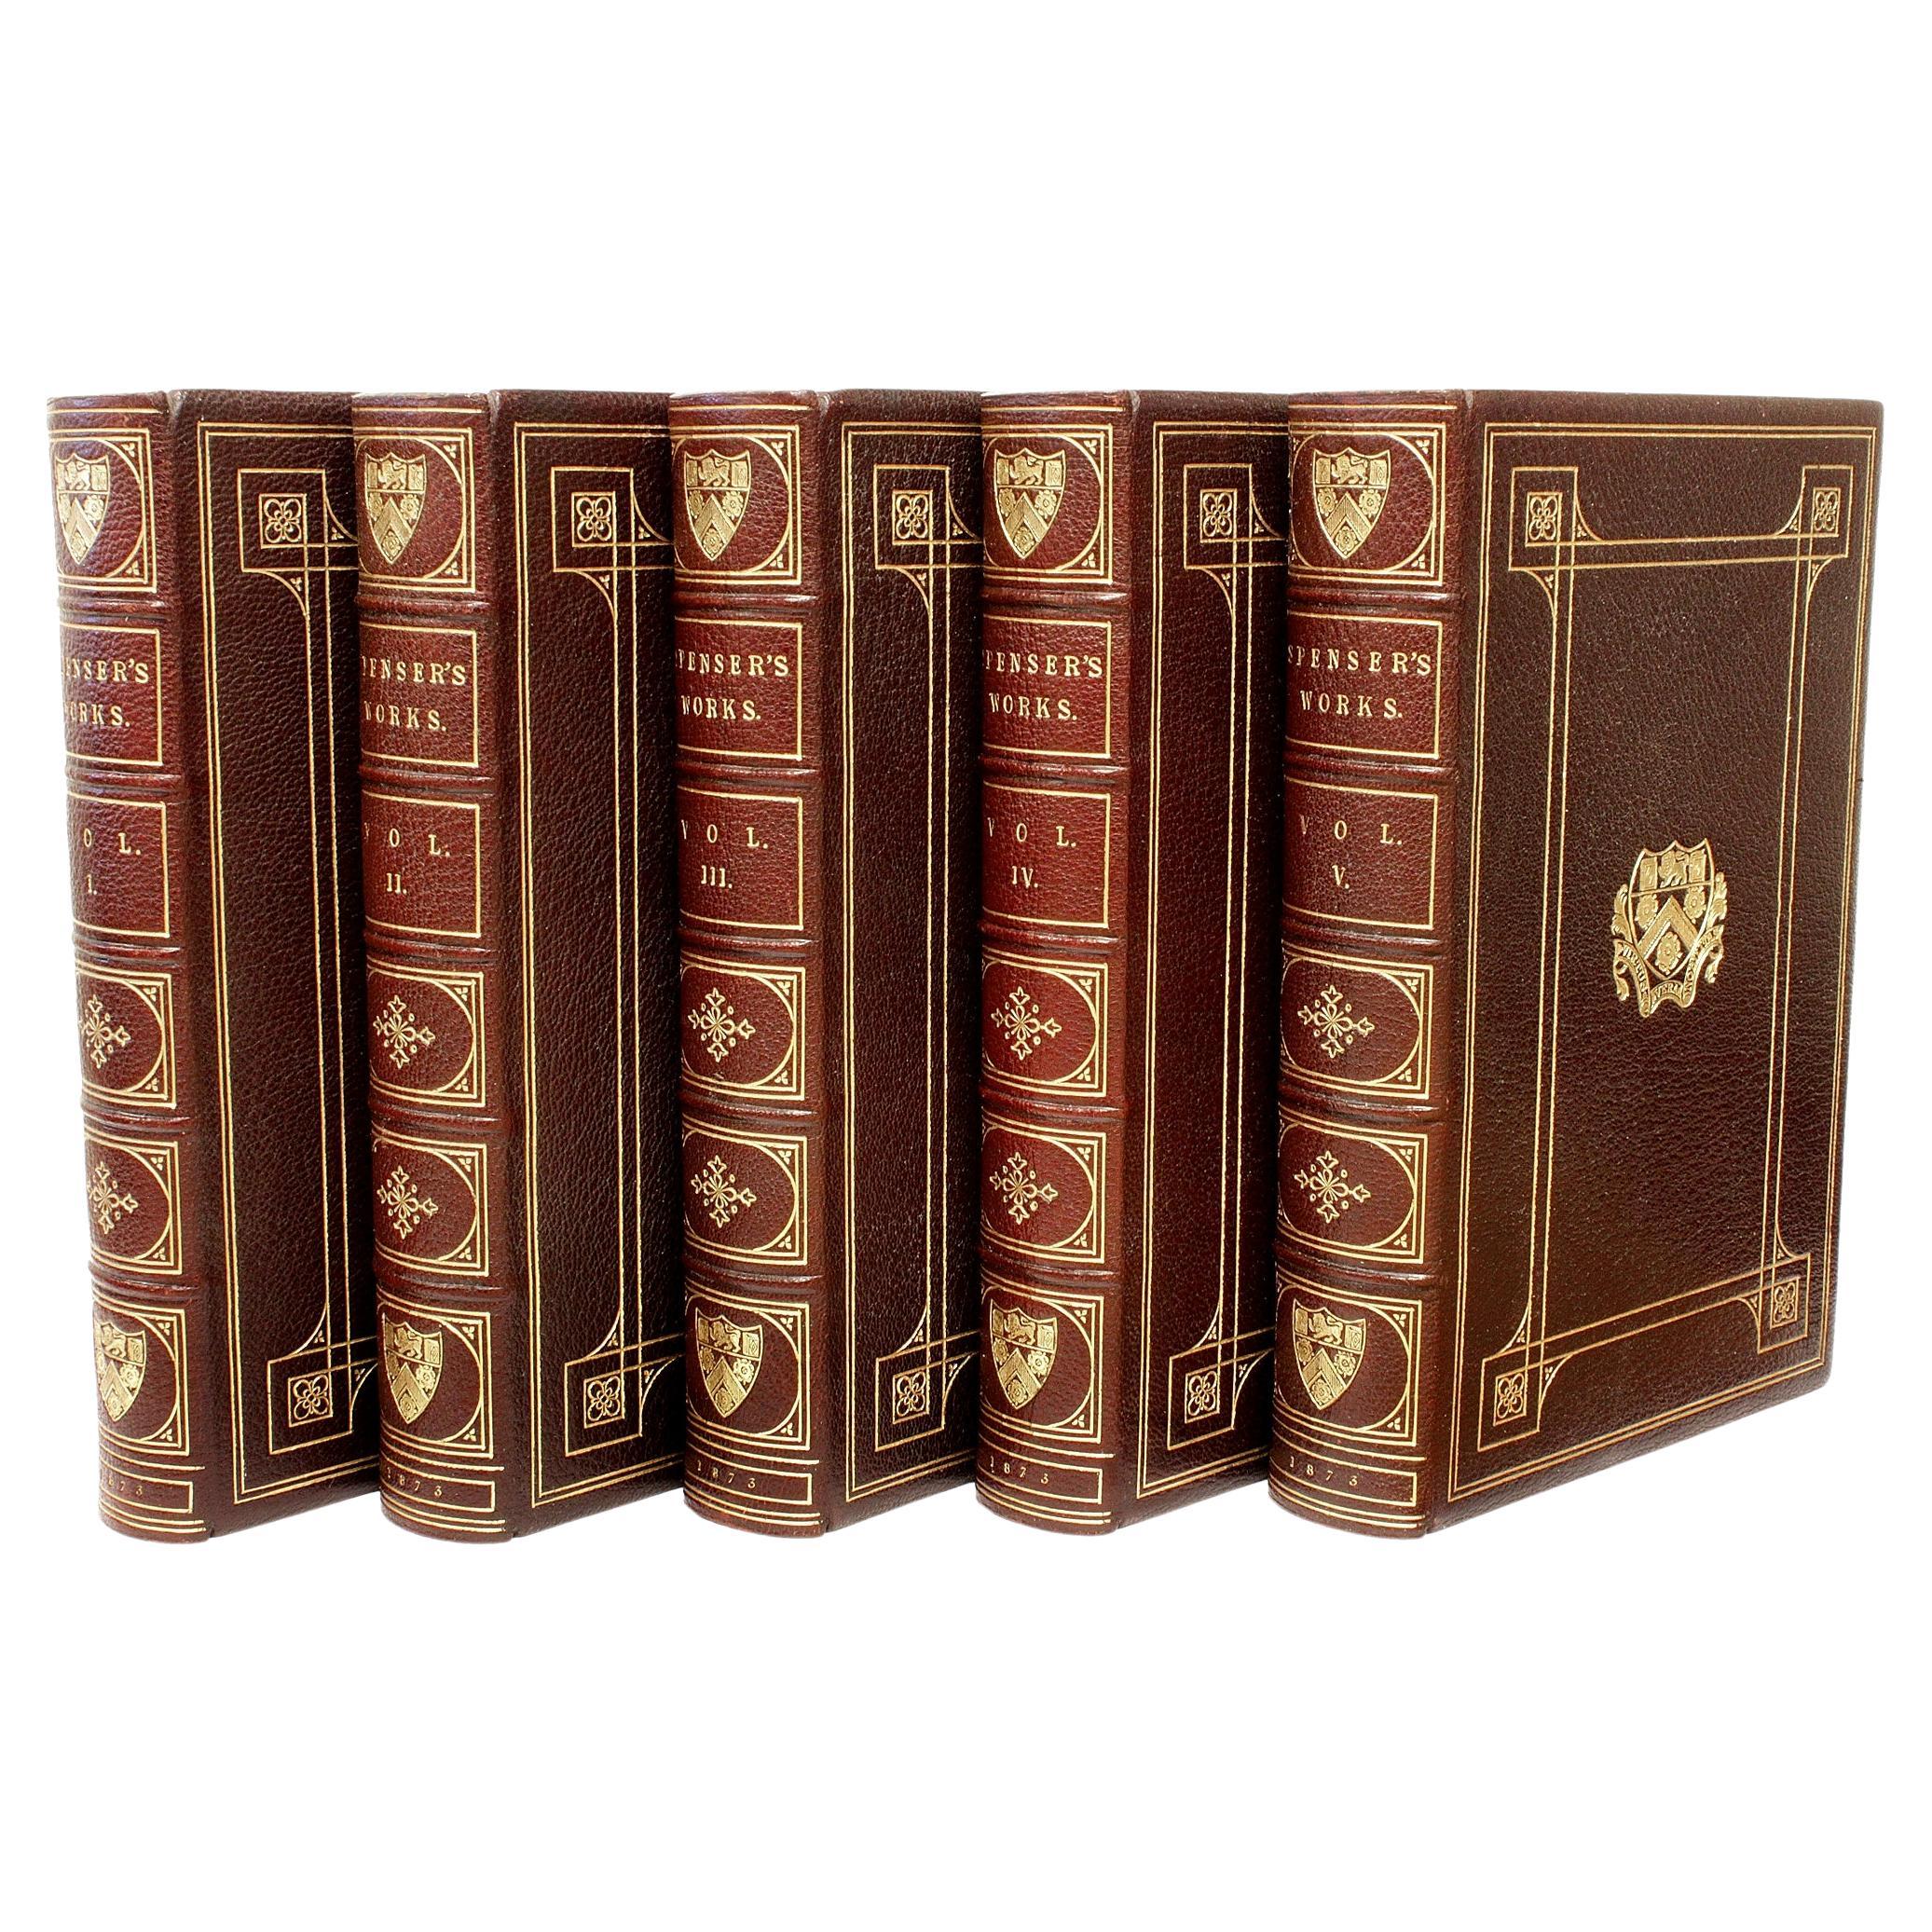 The Works Of Edmund Spenser. 5 VOLUMES - IN A FINE FULL LEATHER BINDING ! For Sale